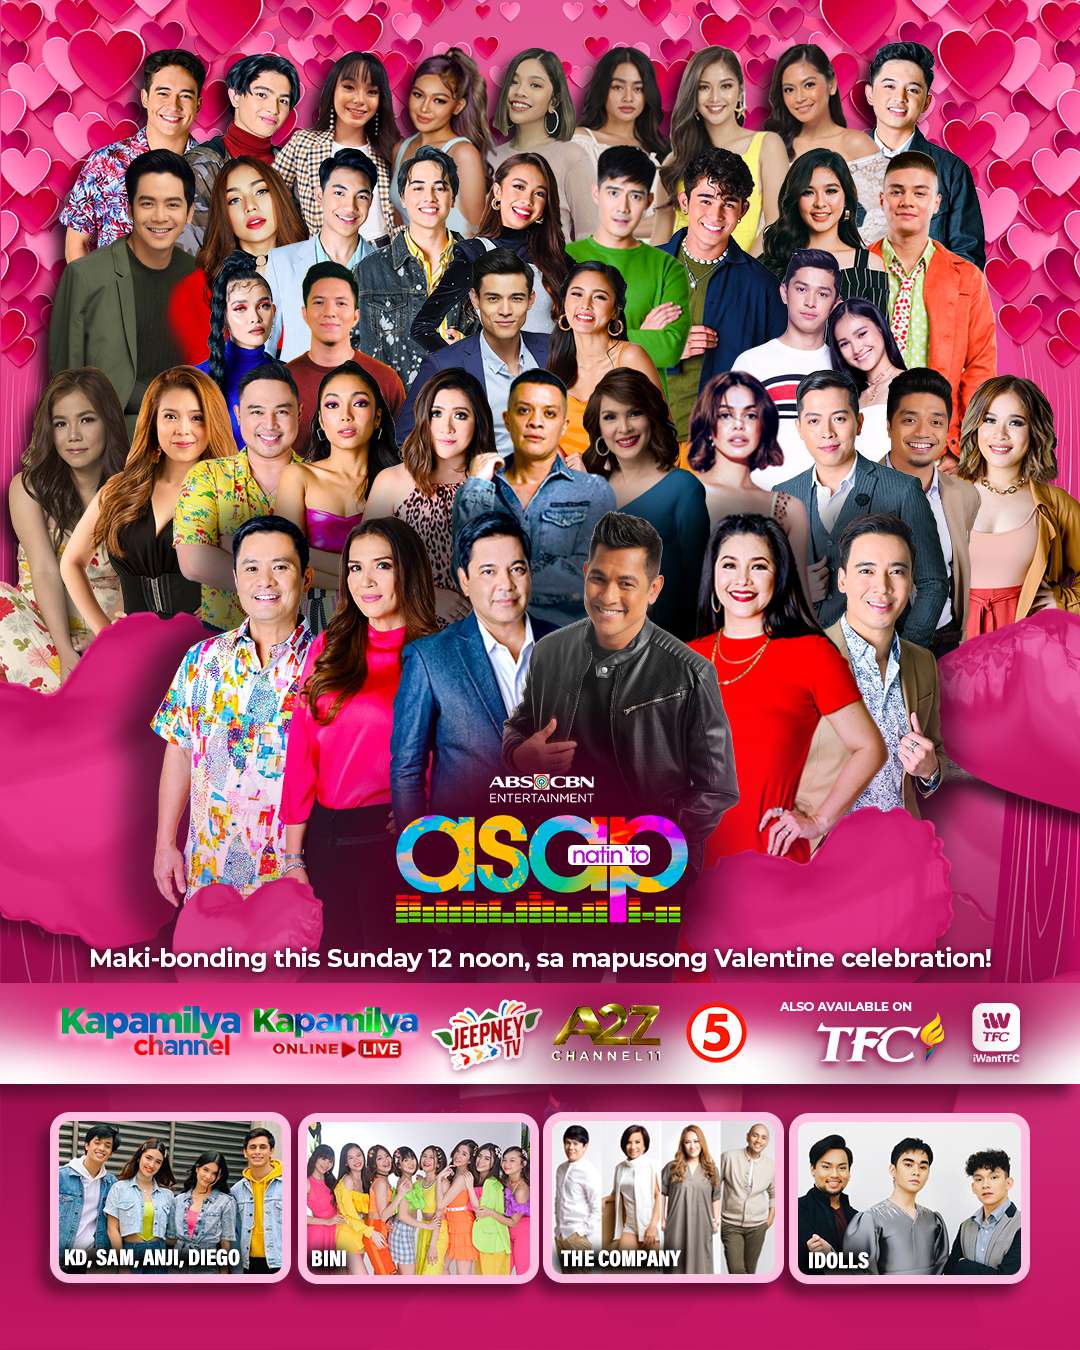 ‘ASAP Natin ‘To’ Celebrates Valentine’s Day with WorldClass Acts